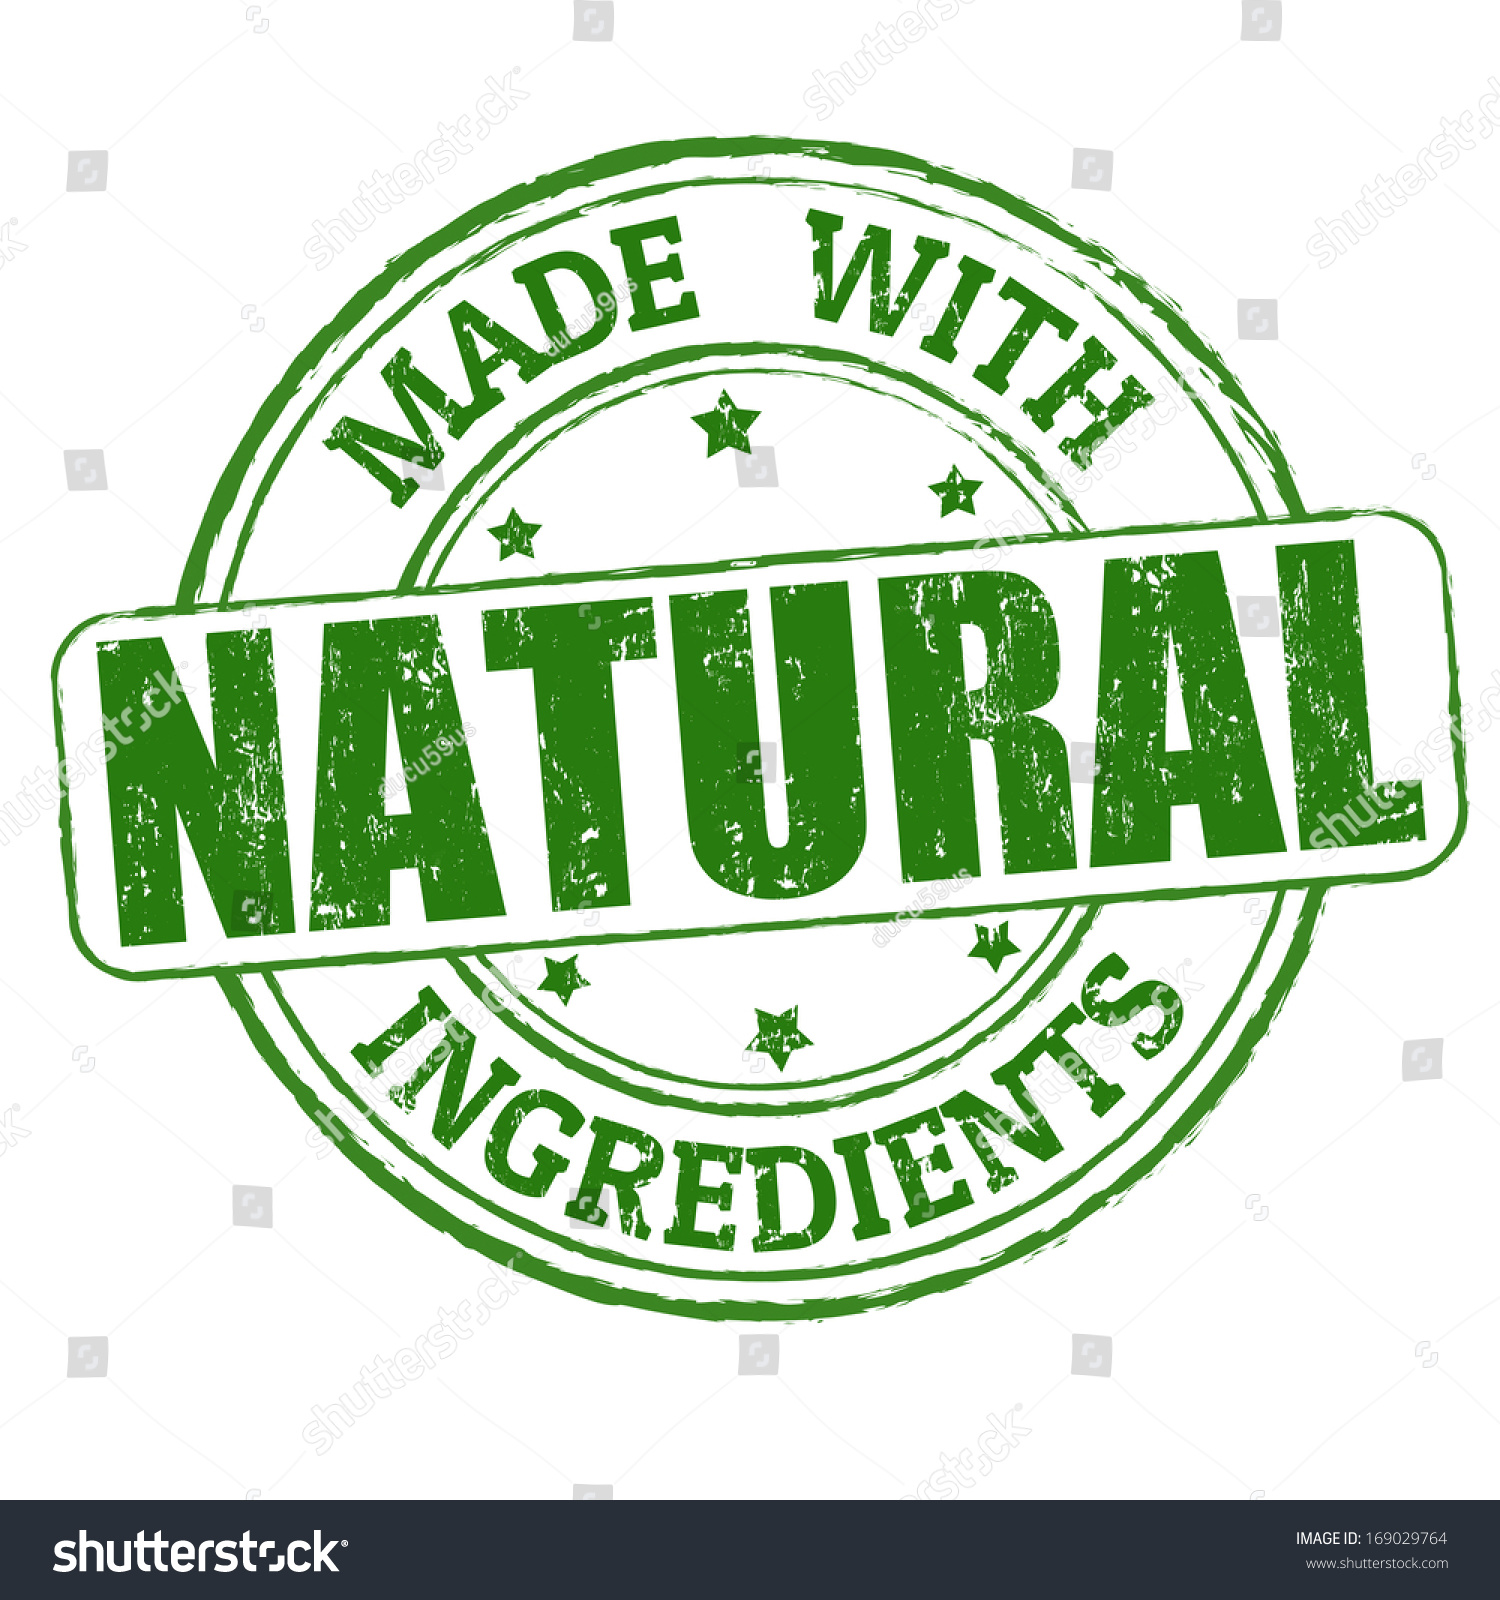 Made with natural ingredients grunge rubber stamp, vector illustration #169029764